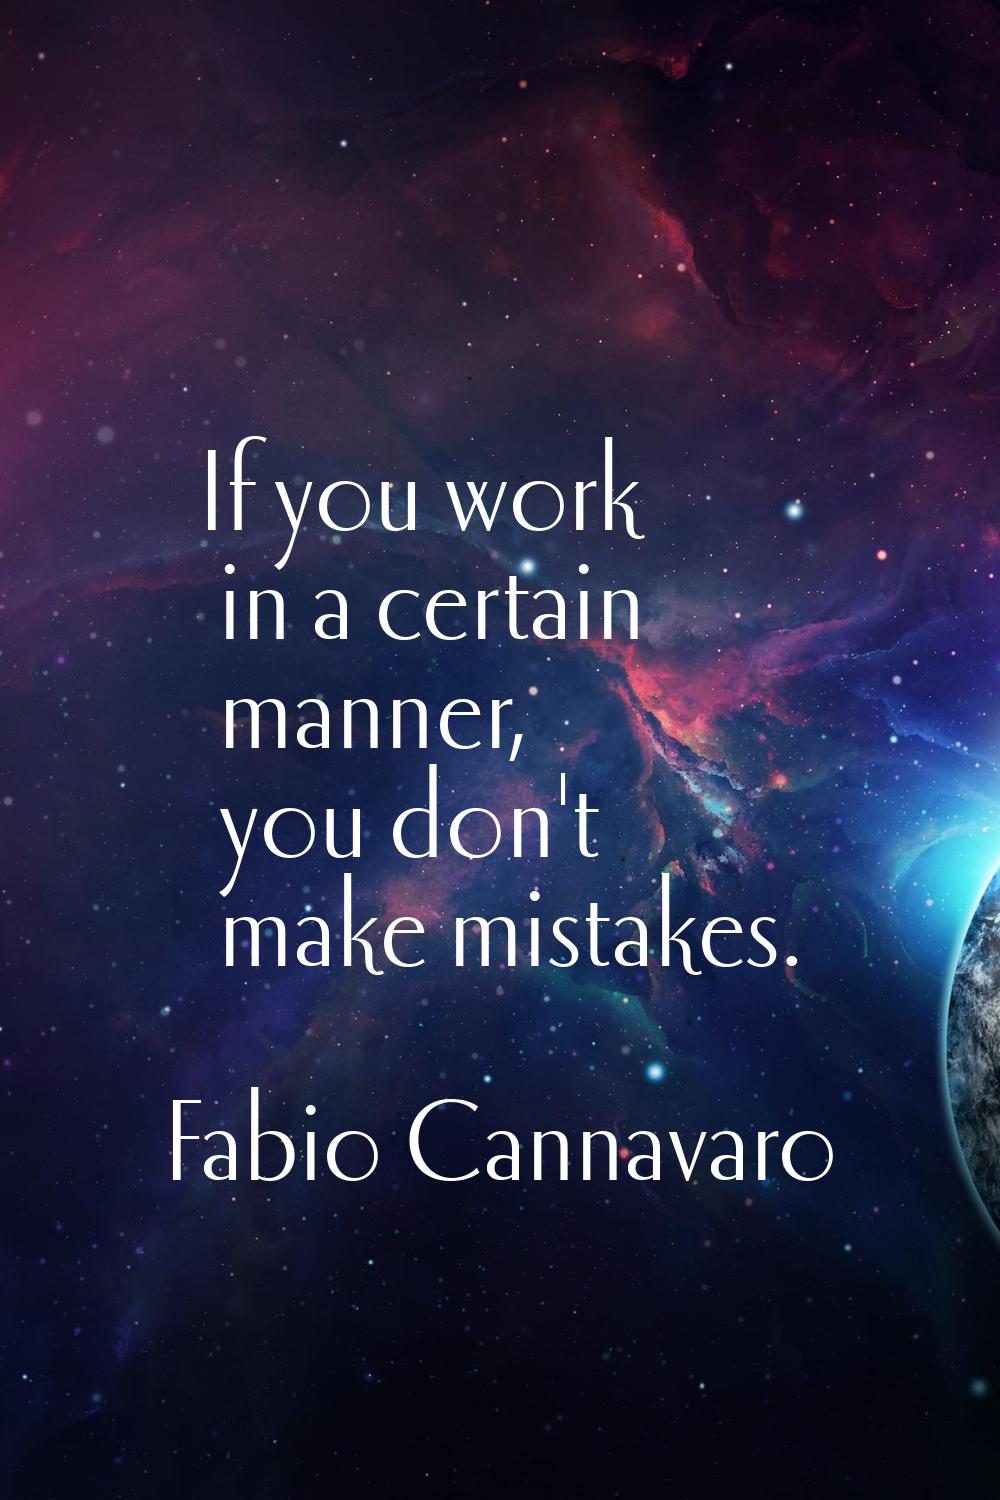 If you work in a certain manner, you don't make mistakes.